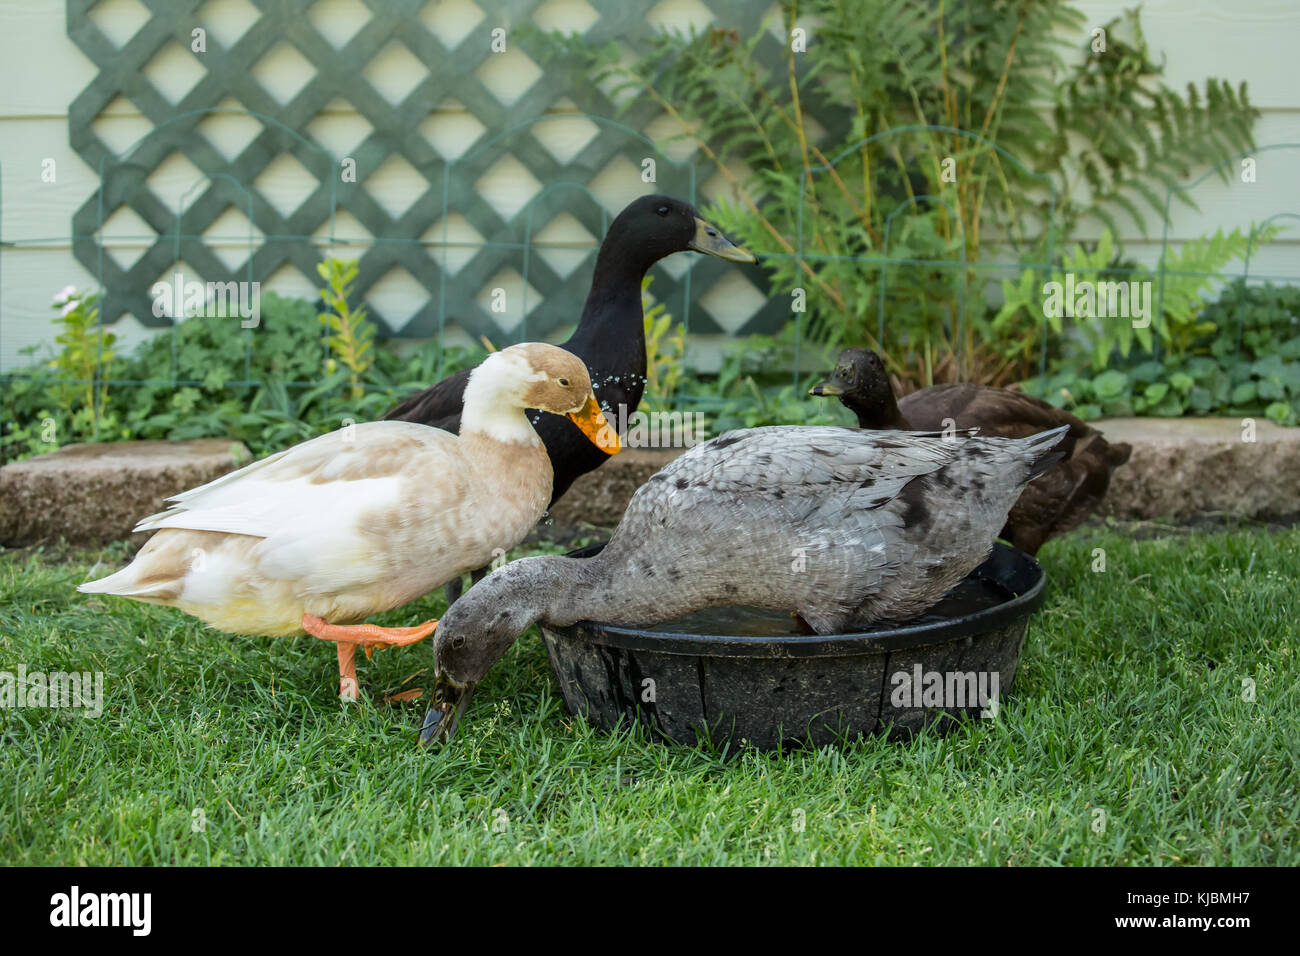 Four types of Indian Runner ducks (Anas platyrhynchos domesticus): White and Fawn, black, chocolate and blue.  They are an unusual breed of domestic d Stock Photo